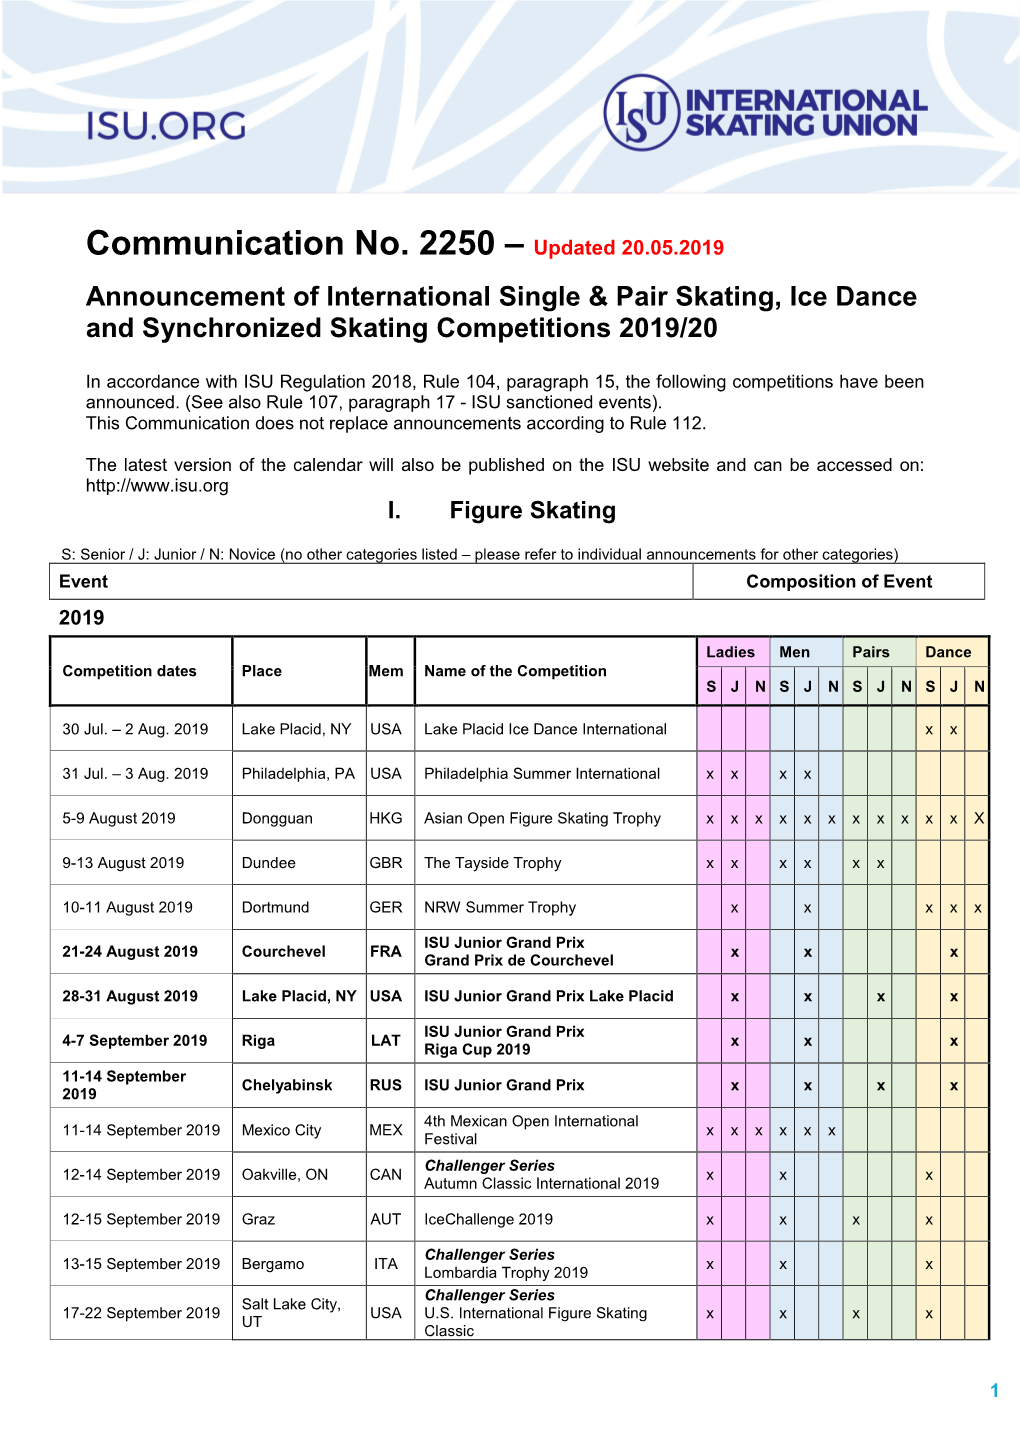 Communication No. 2250 – Updated 20.05.2019 Announcement of International Single & Pair Skating, Ice Dance and Synchronized Skating Competitions 2019/20